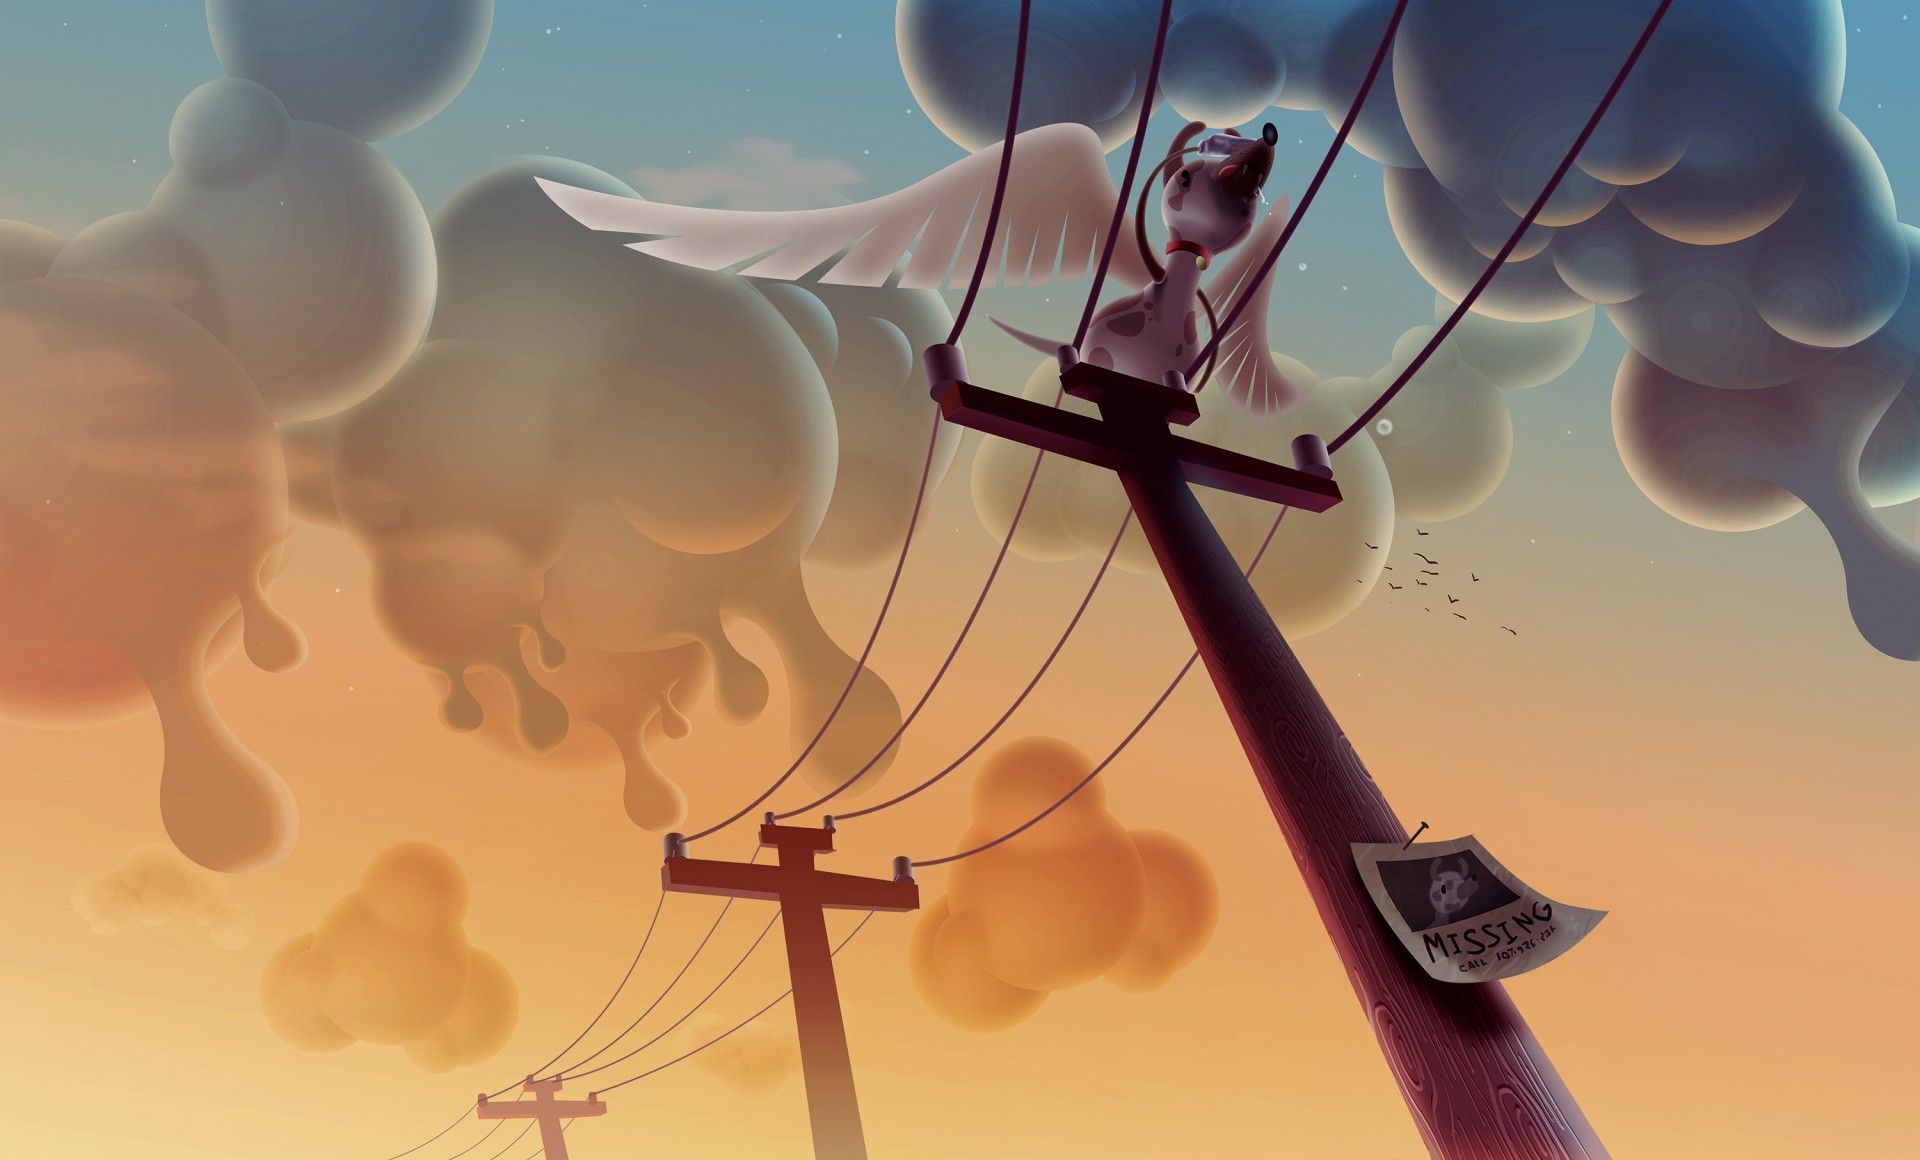 Aaron Campbell, Digital art, Animals, Utility pole, Dog, Clouds, Wings, Humor Wallpaper